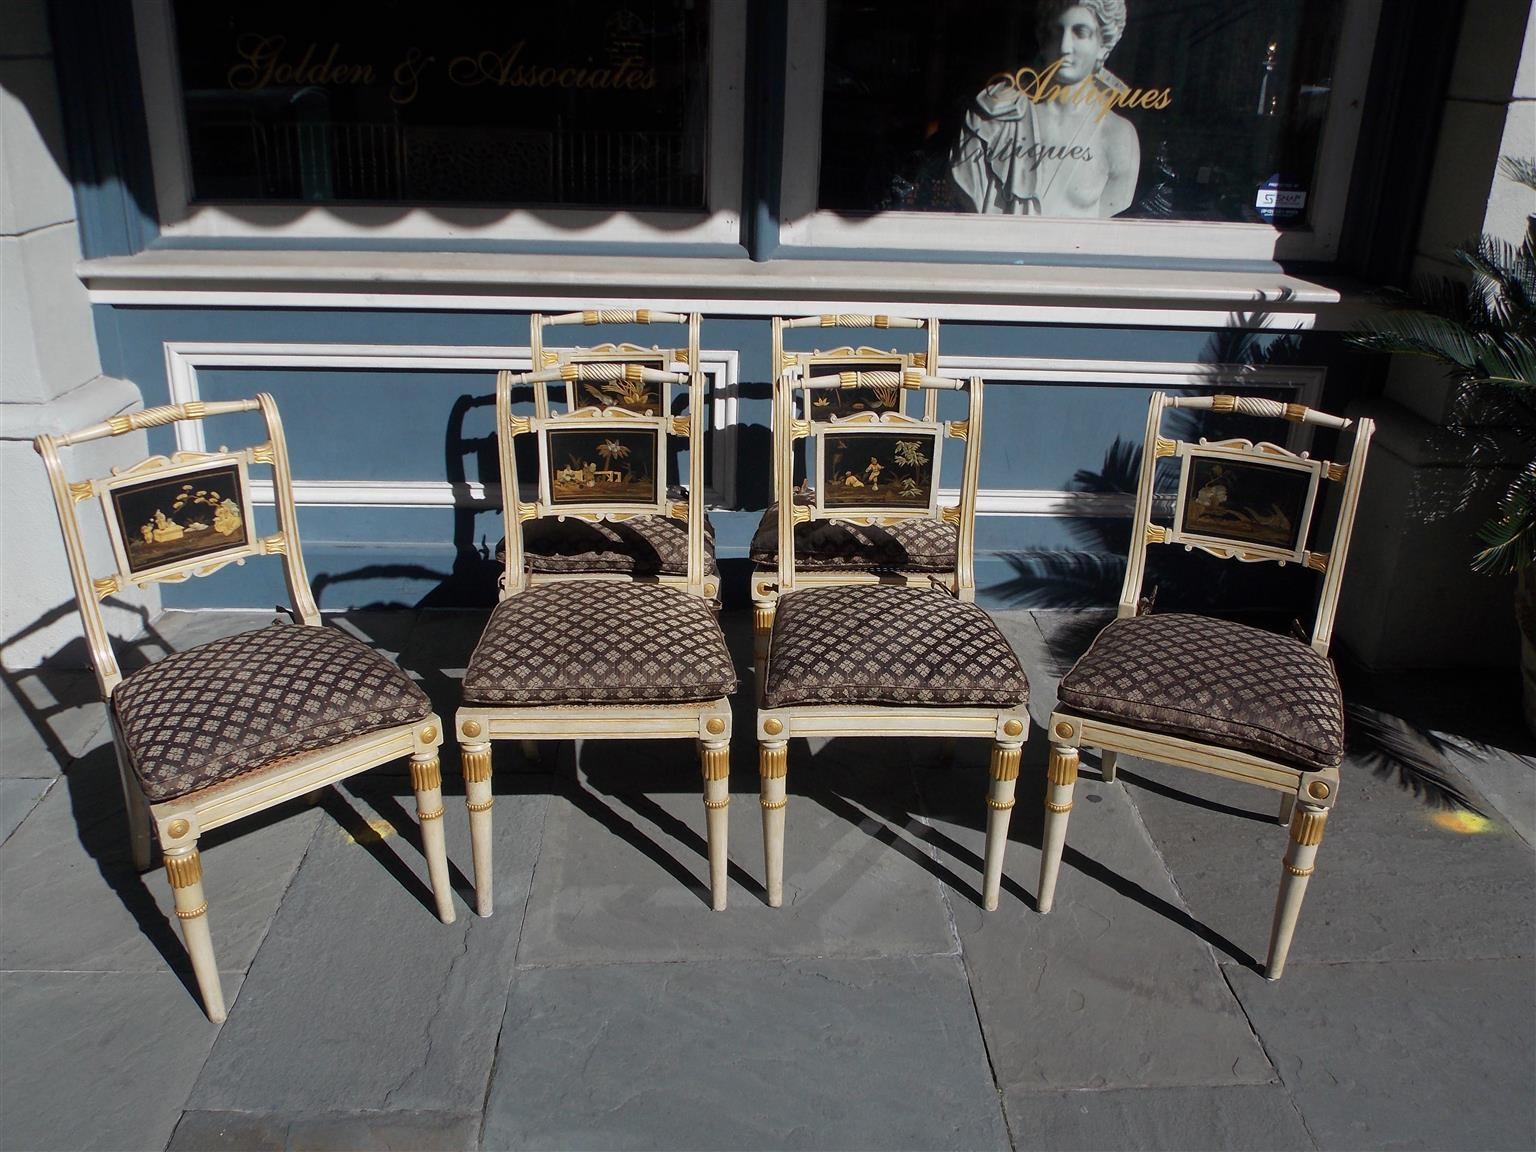 Set of Six English Regency chinoiserie painted and gilt side chairs with floral gilt medallions, cane seats with silk upholstered cushions, and resting on the original splayed  legs. Early 19th century.